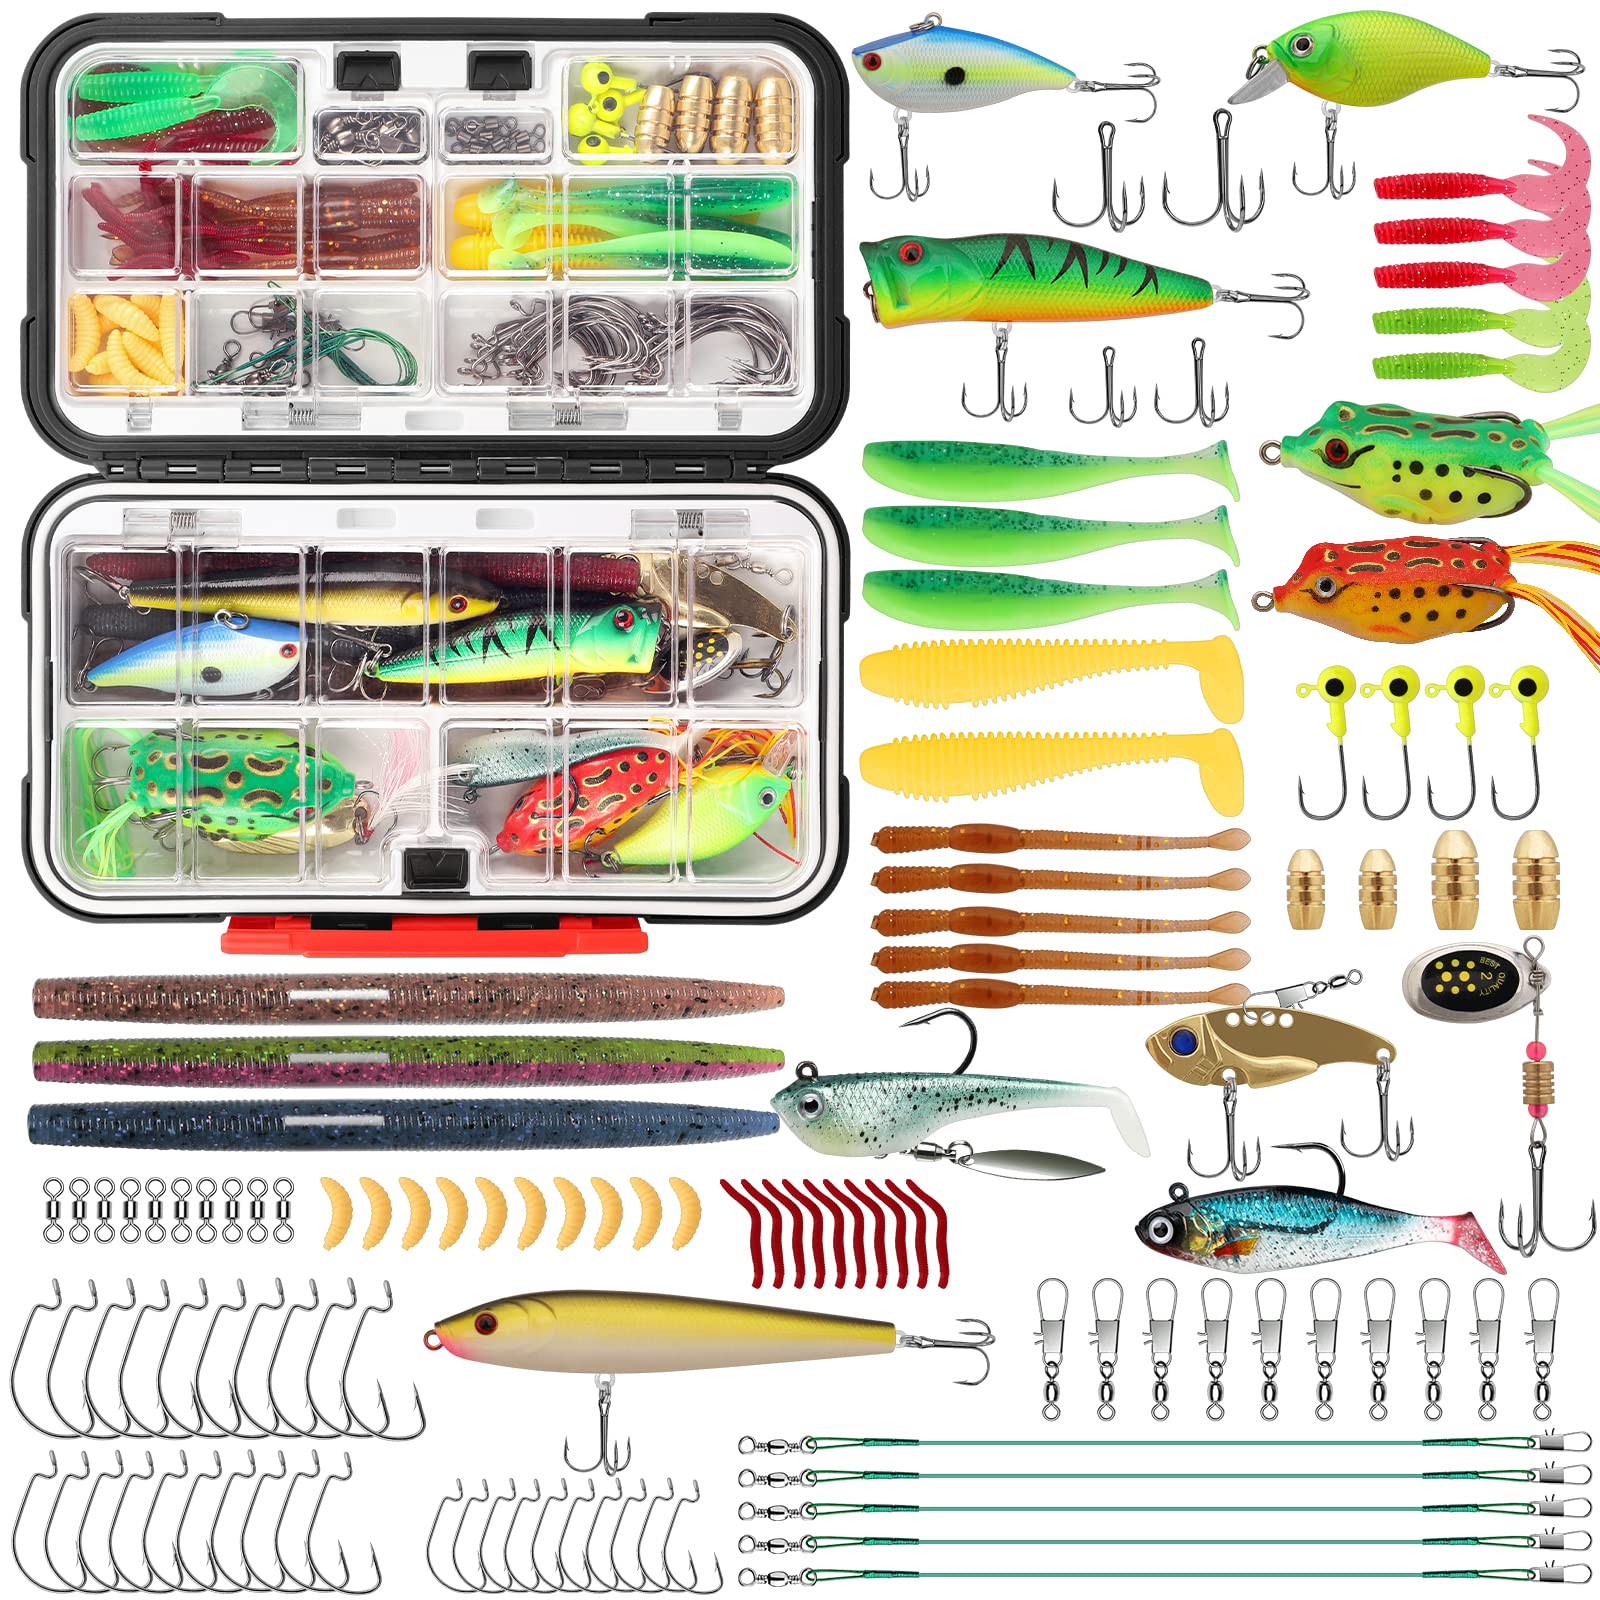 TRUSCEND Fishing Lures Kit with Tackle Box for Bass Trout Selmon